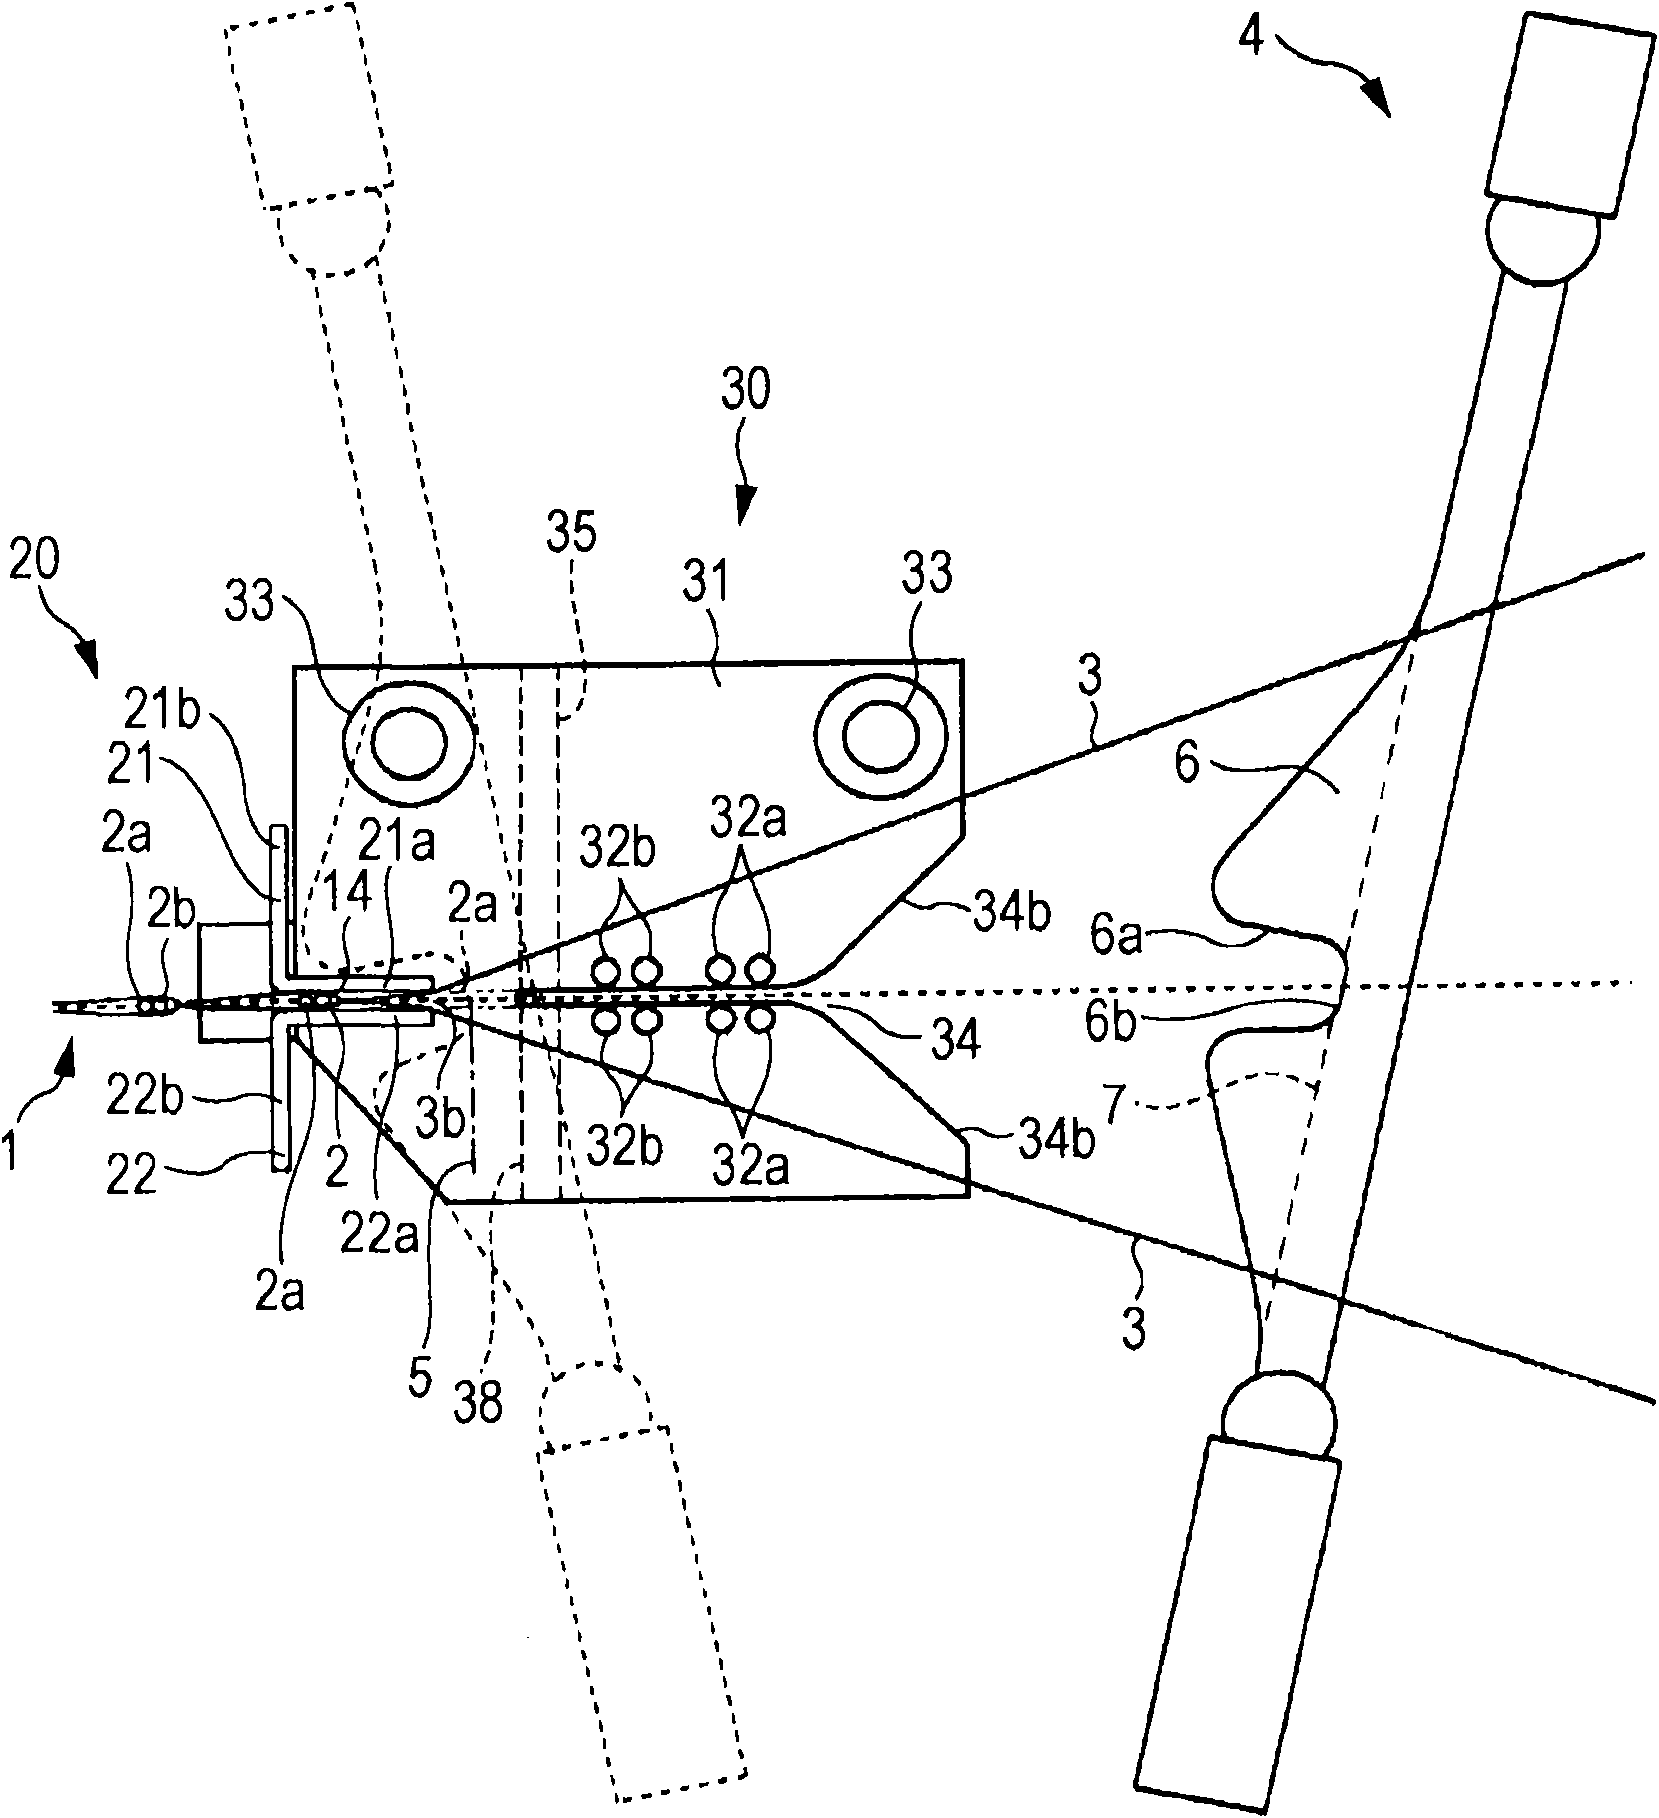 Weaving edge forming device of a rubber strengthening textile weaving loom